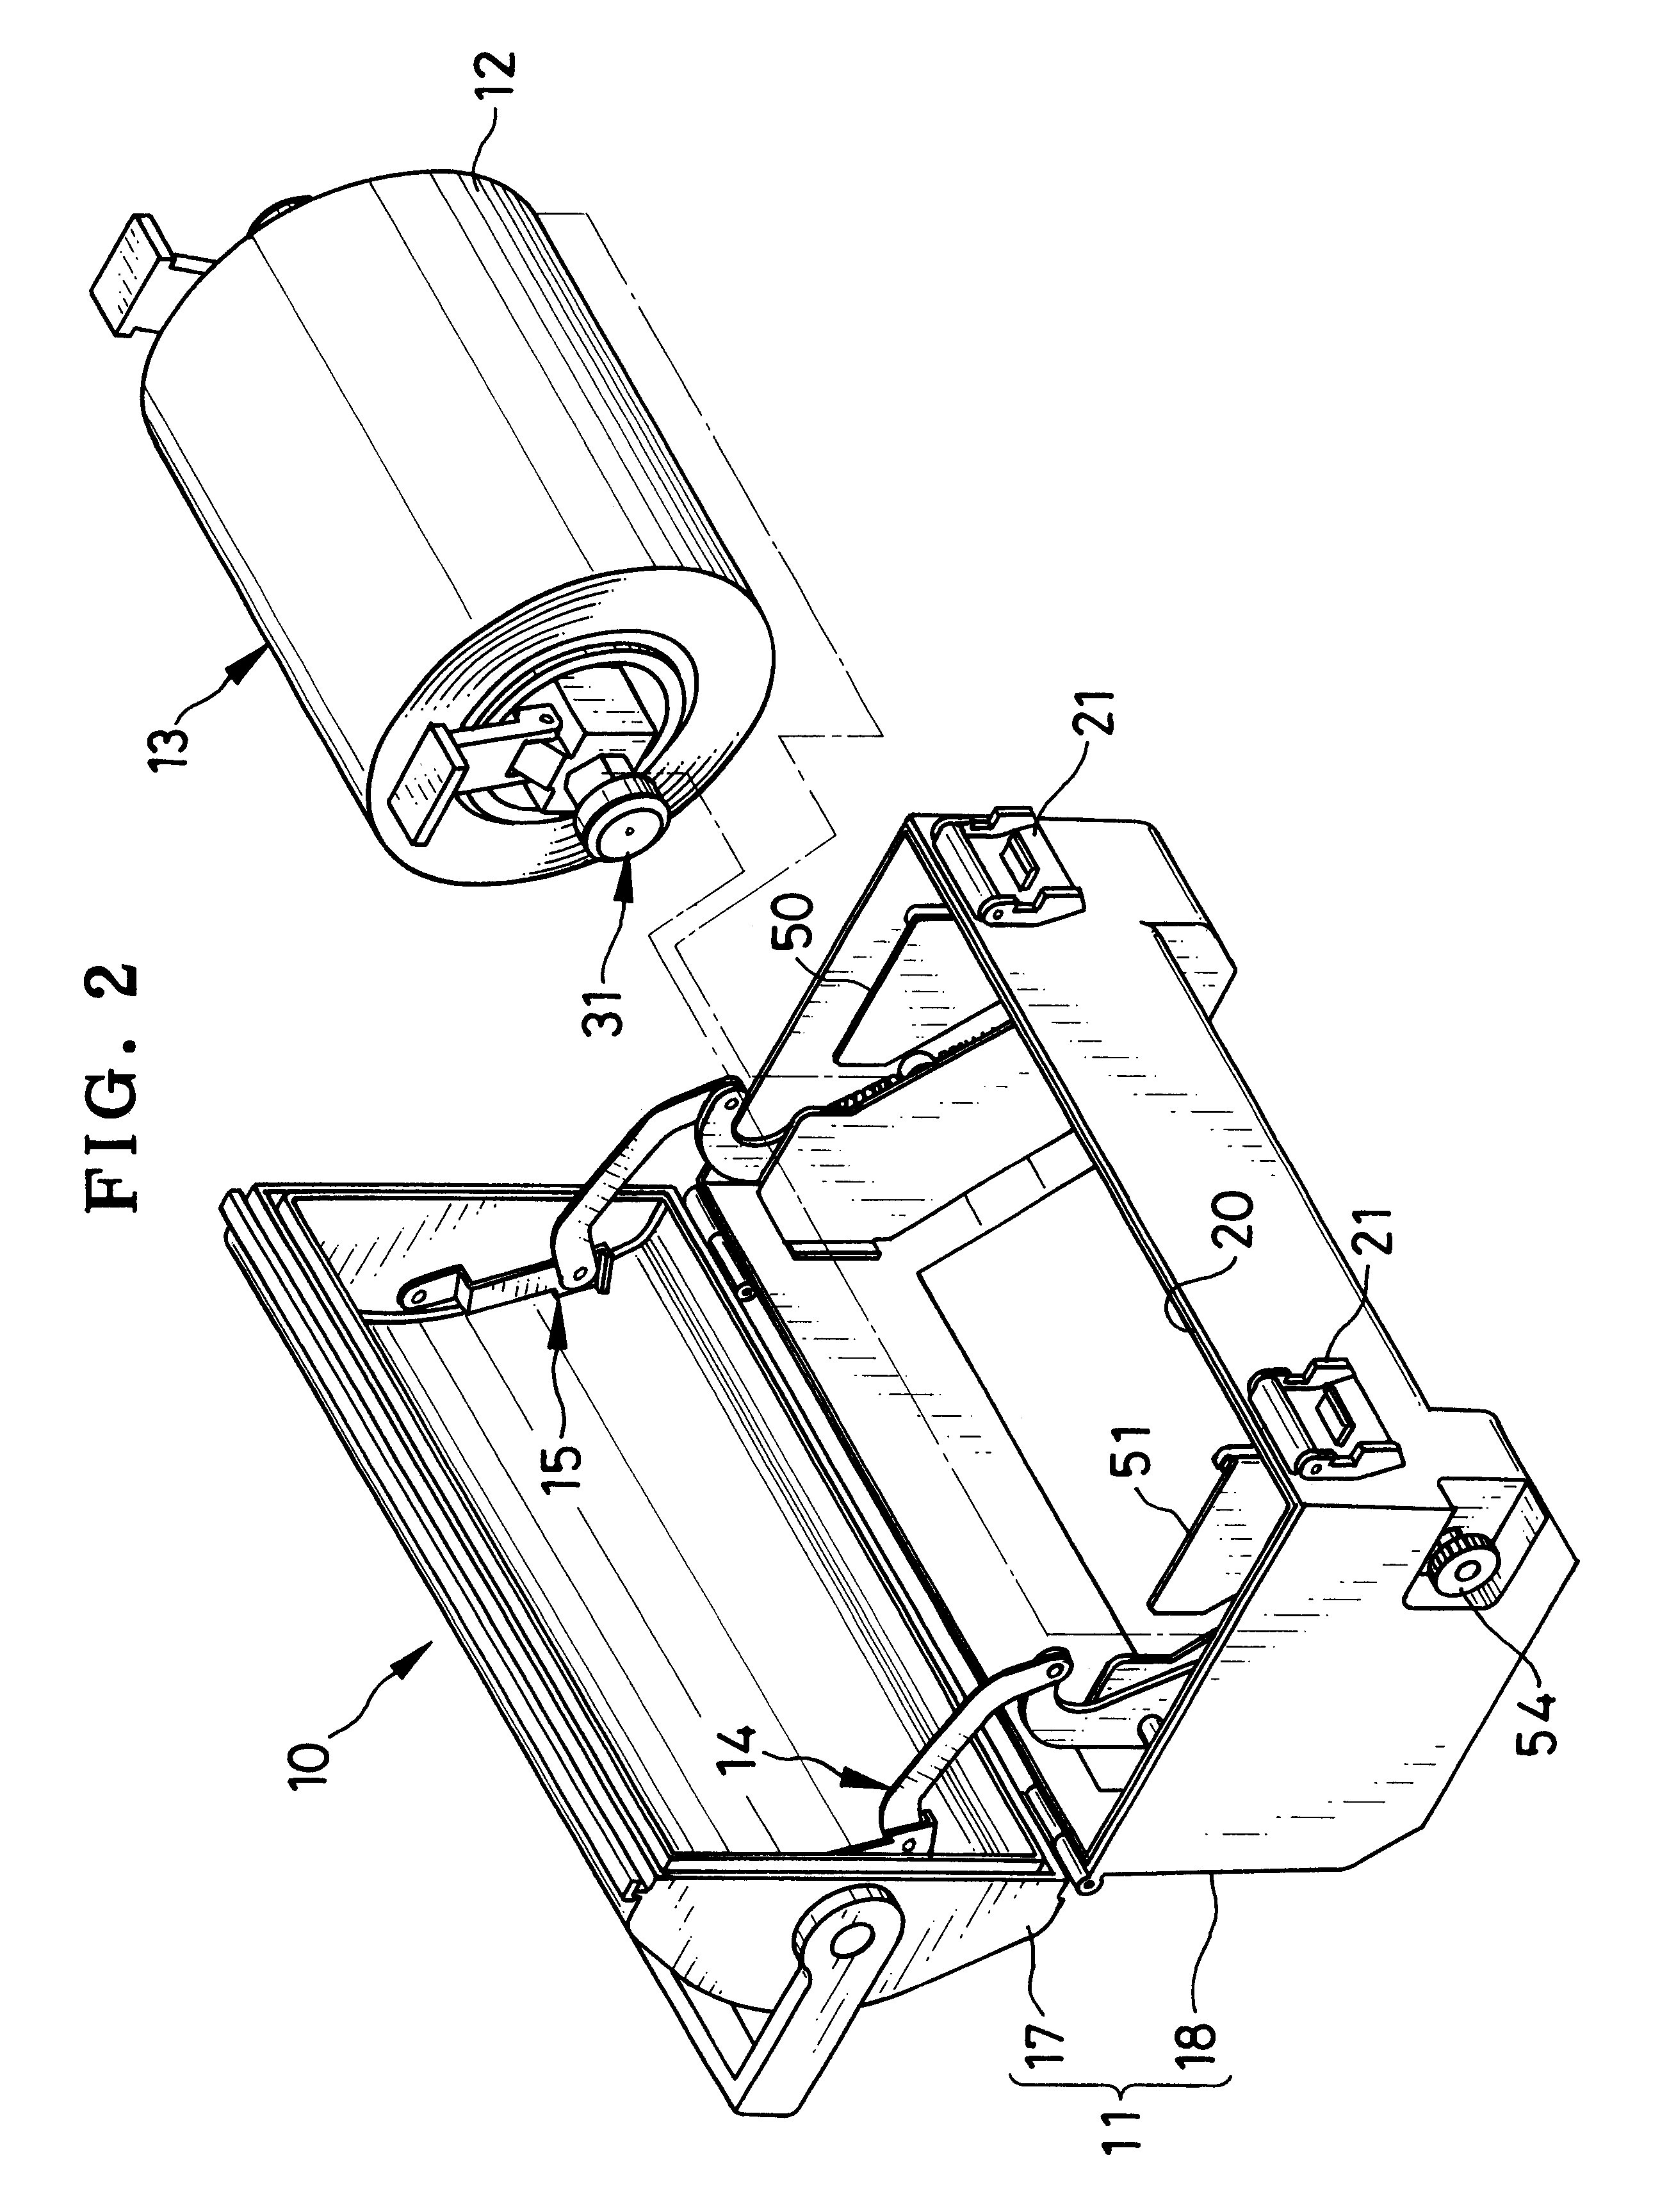 Supply magazine for containing recording material roll